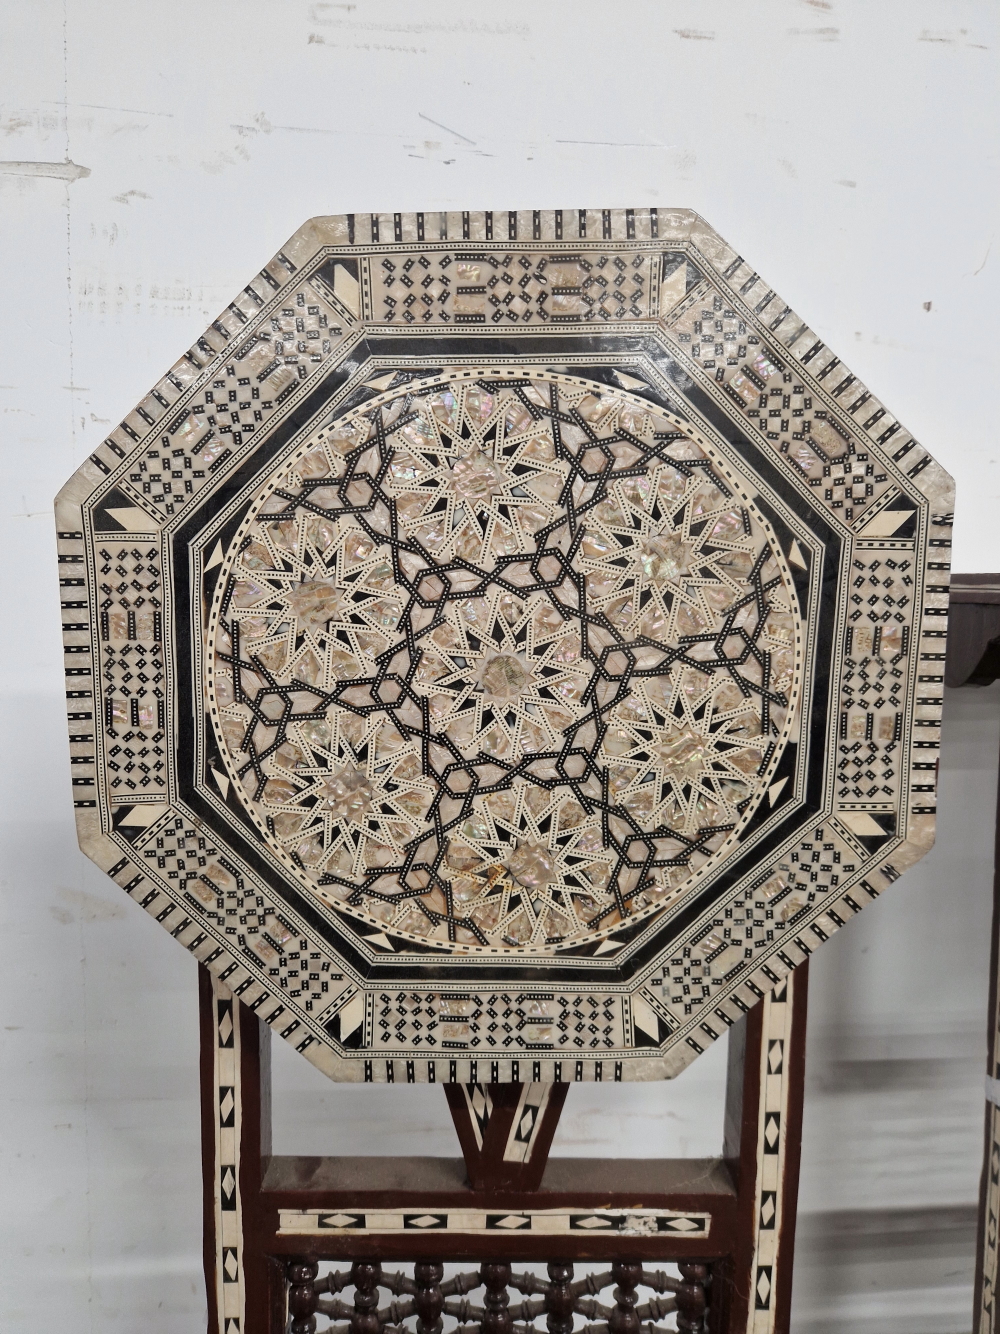 A PAIR OF ISLAMIC FOLDING OCTAGONAL TABLES GEOMETRICALLY INLAID IN MOTHER OF PEARL AND EBONY - Image 13 of 13